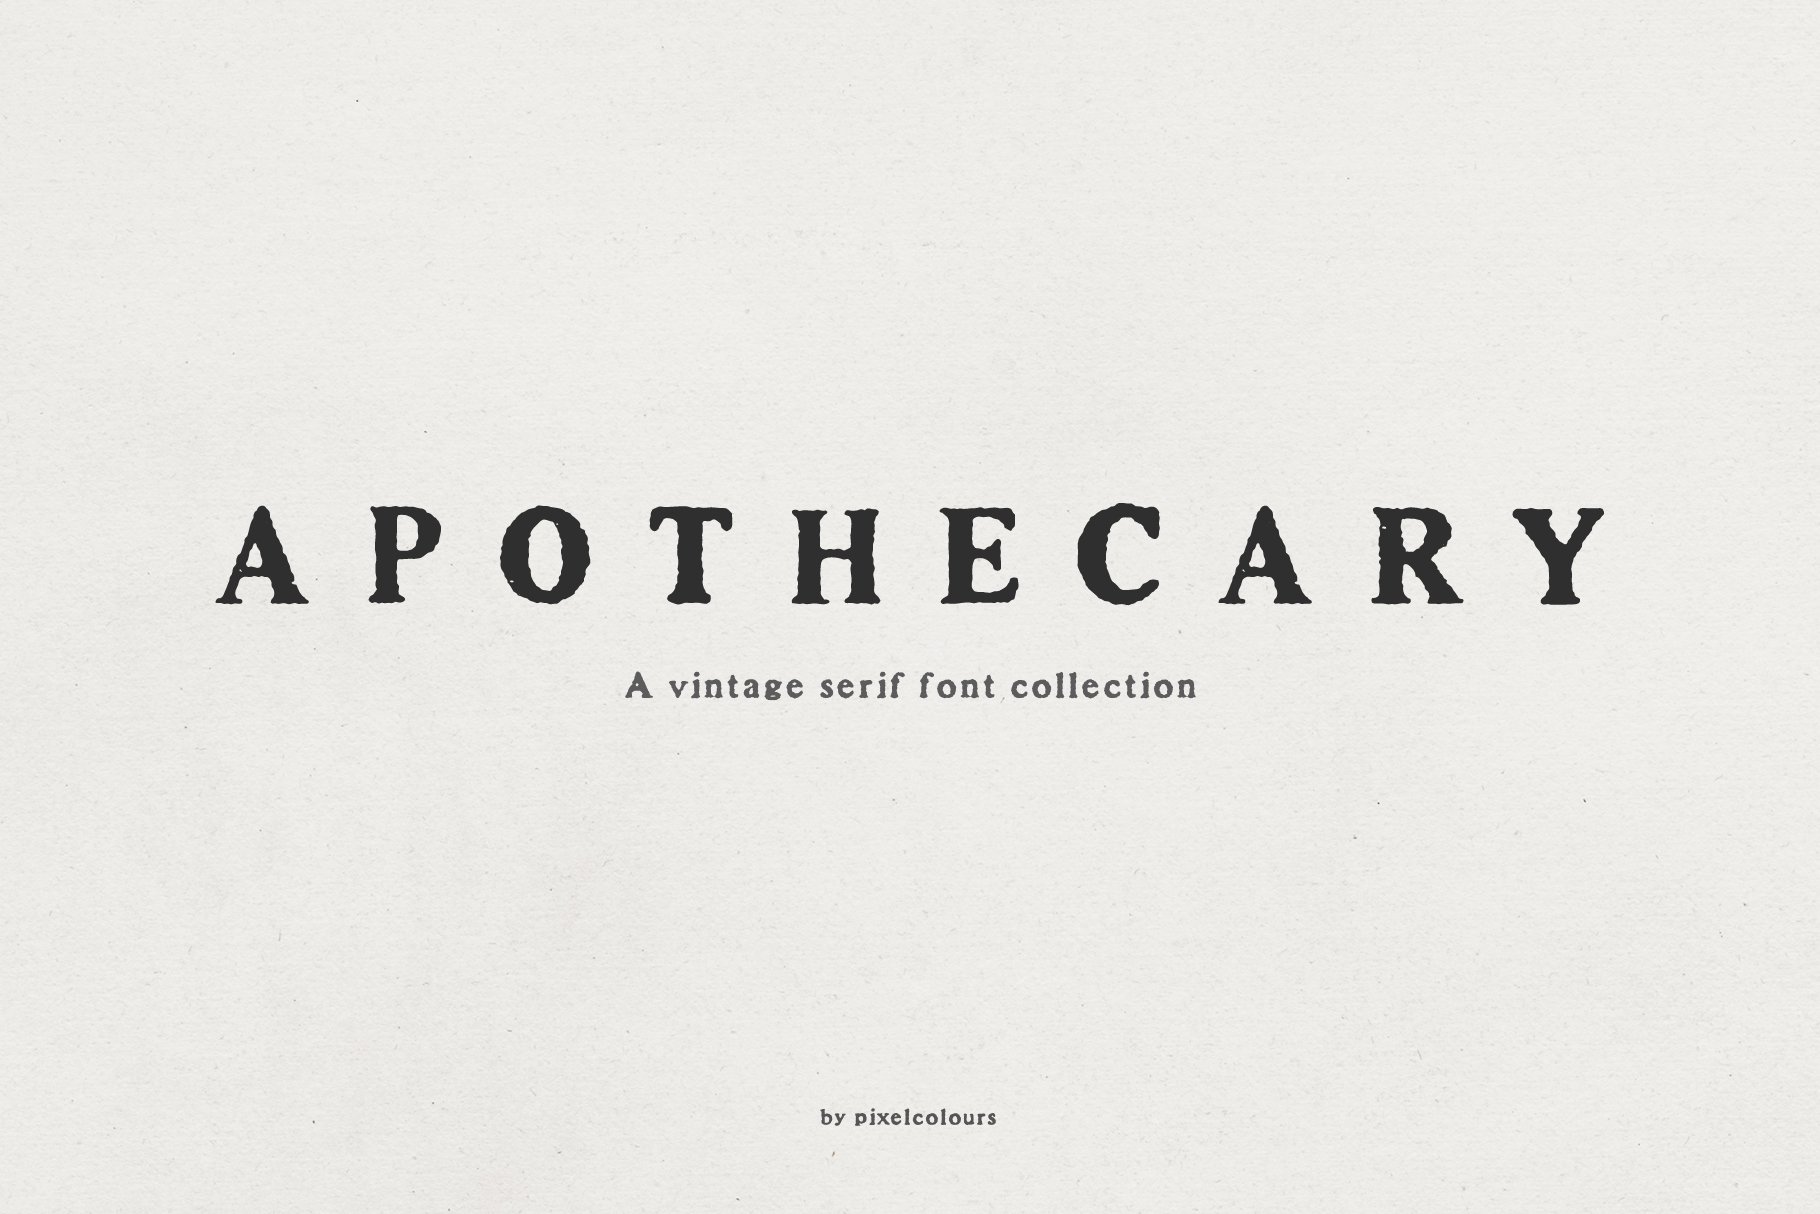 Apothecary Serif Font Collection cover image.